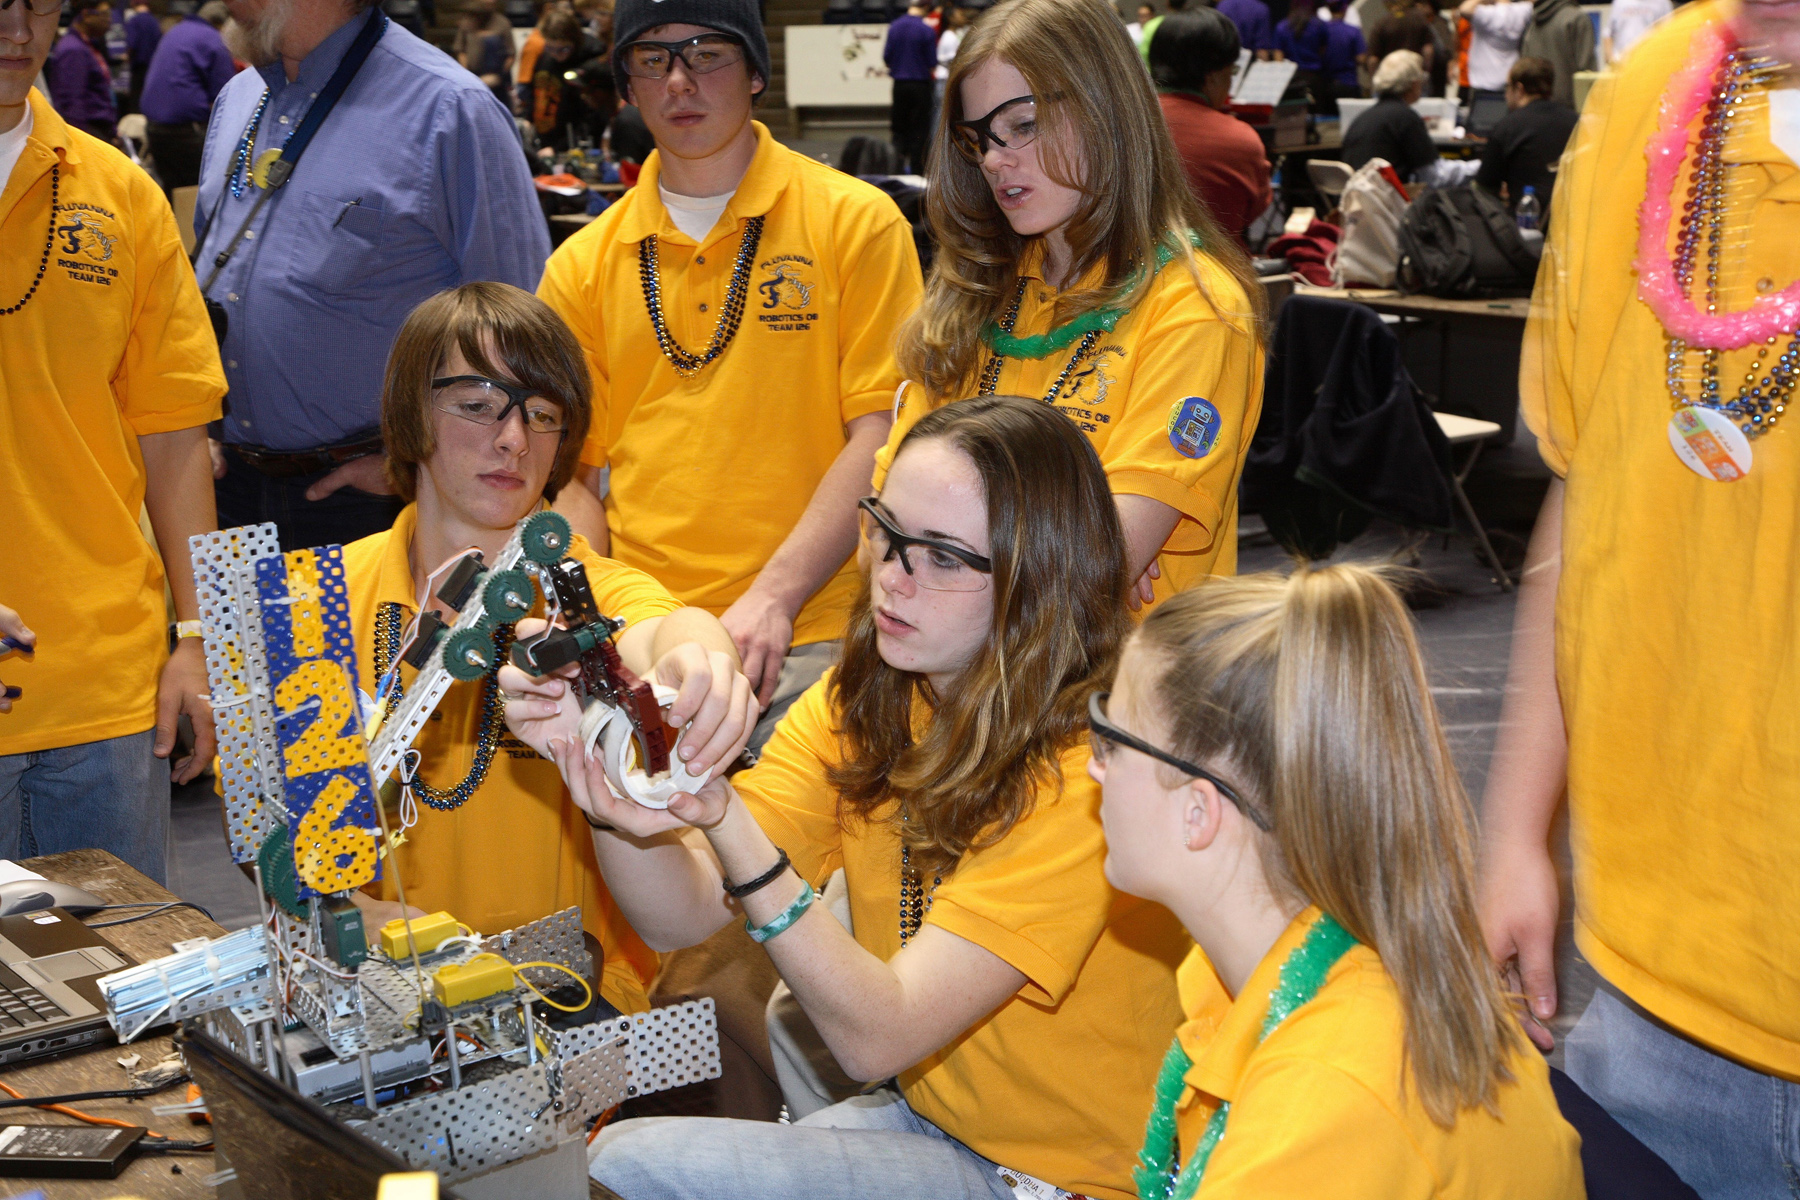 Students work together to build a robot